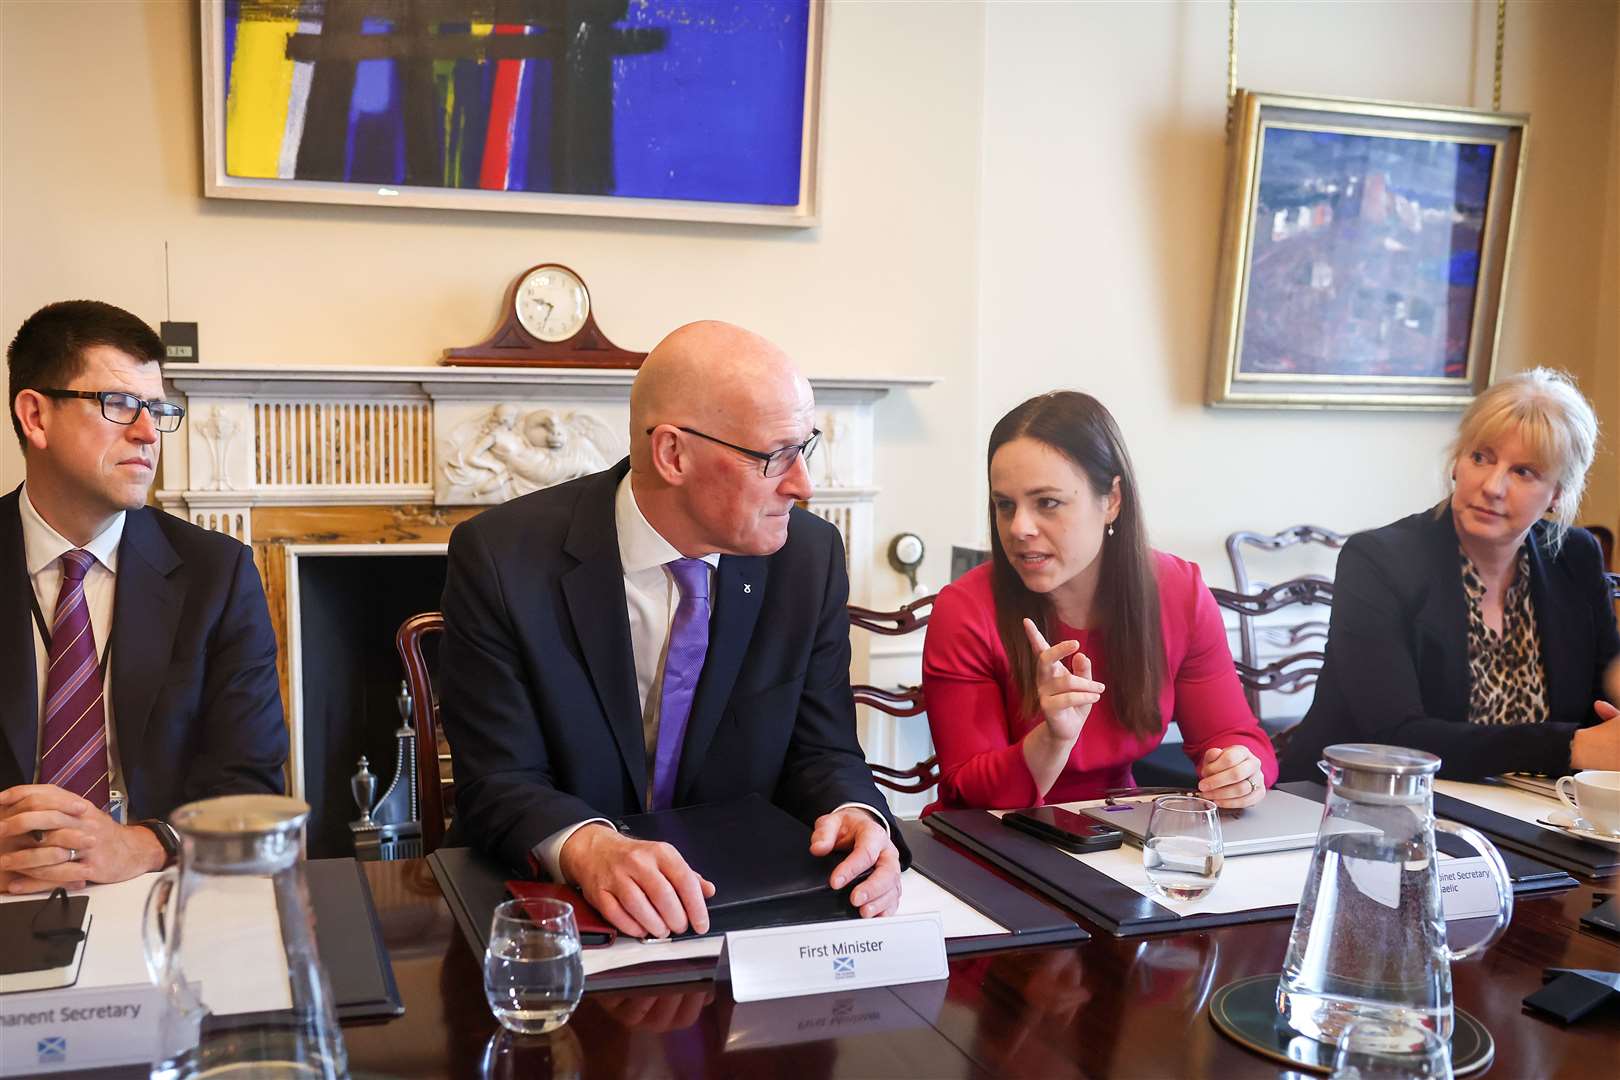 New First Minister John Swinney sitting next to Kate Forbes as he chairs his first Cabinet meeting since taking up the role, at Bute House in Edinburgh (Jeff J Mitchell/PA)